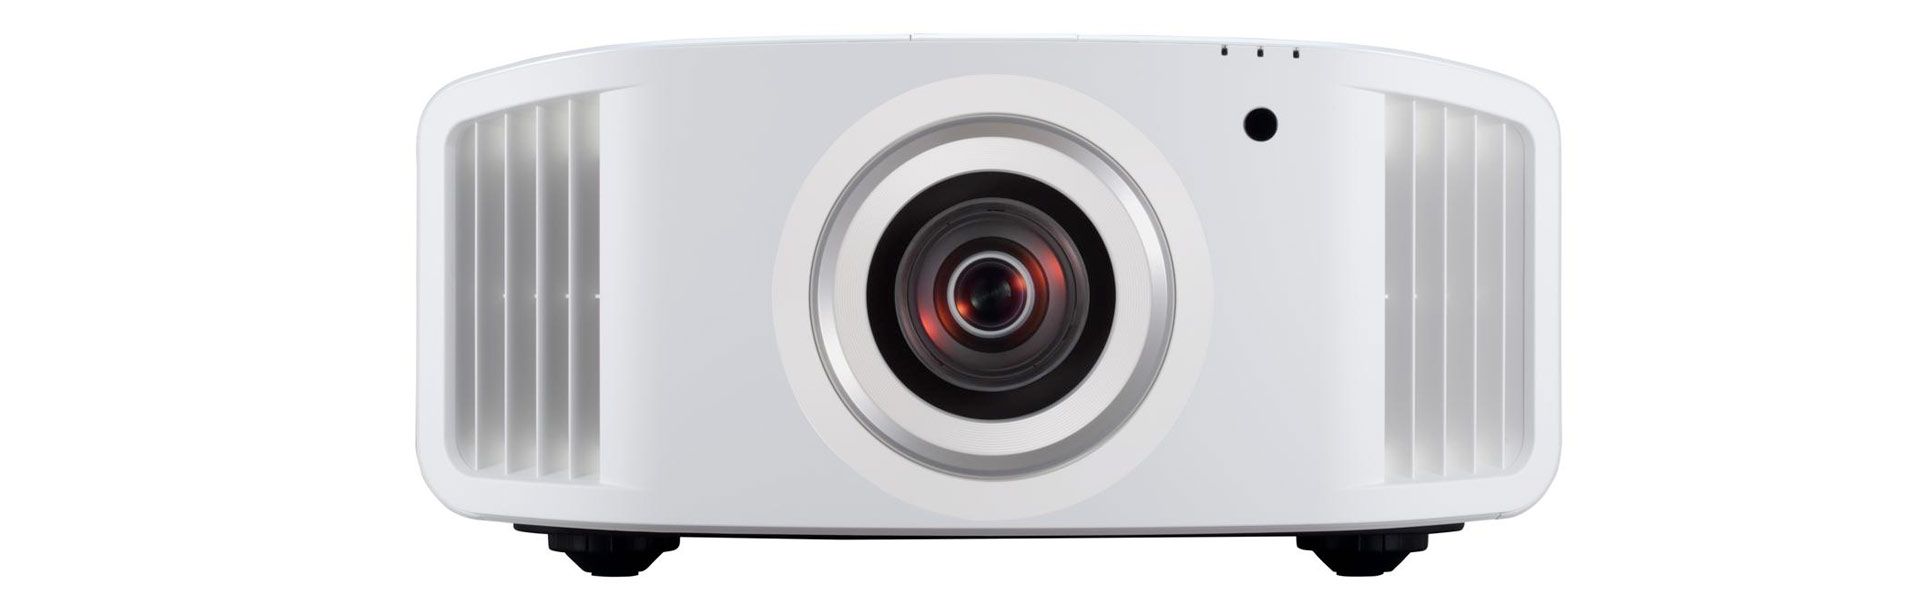 JVC projectors from Projectorpoint